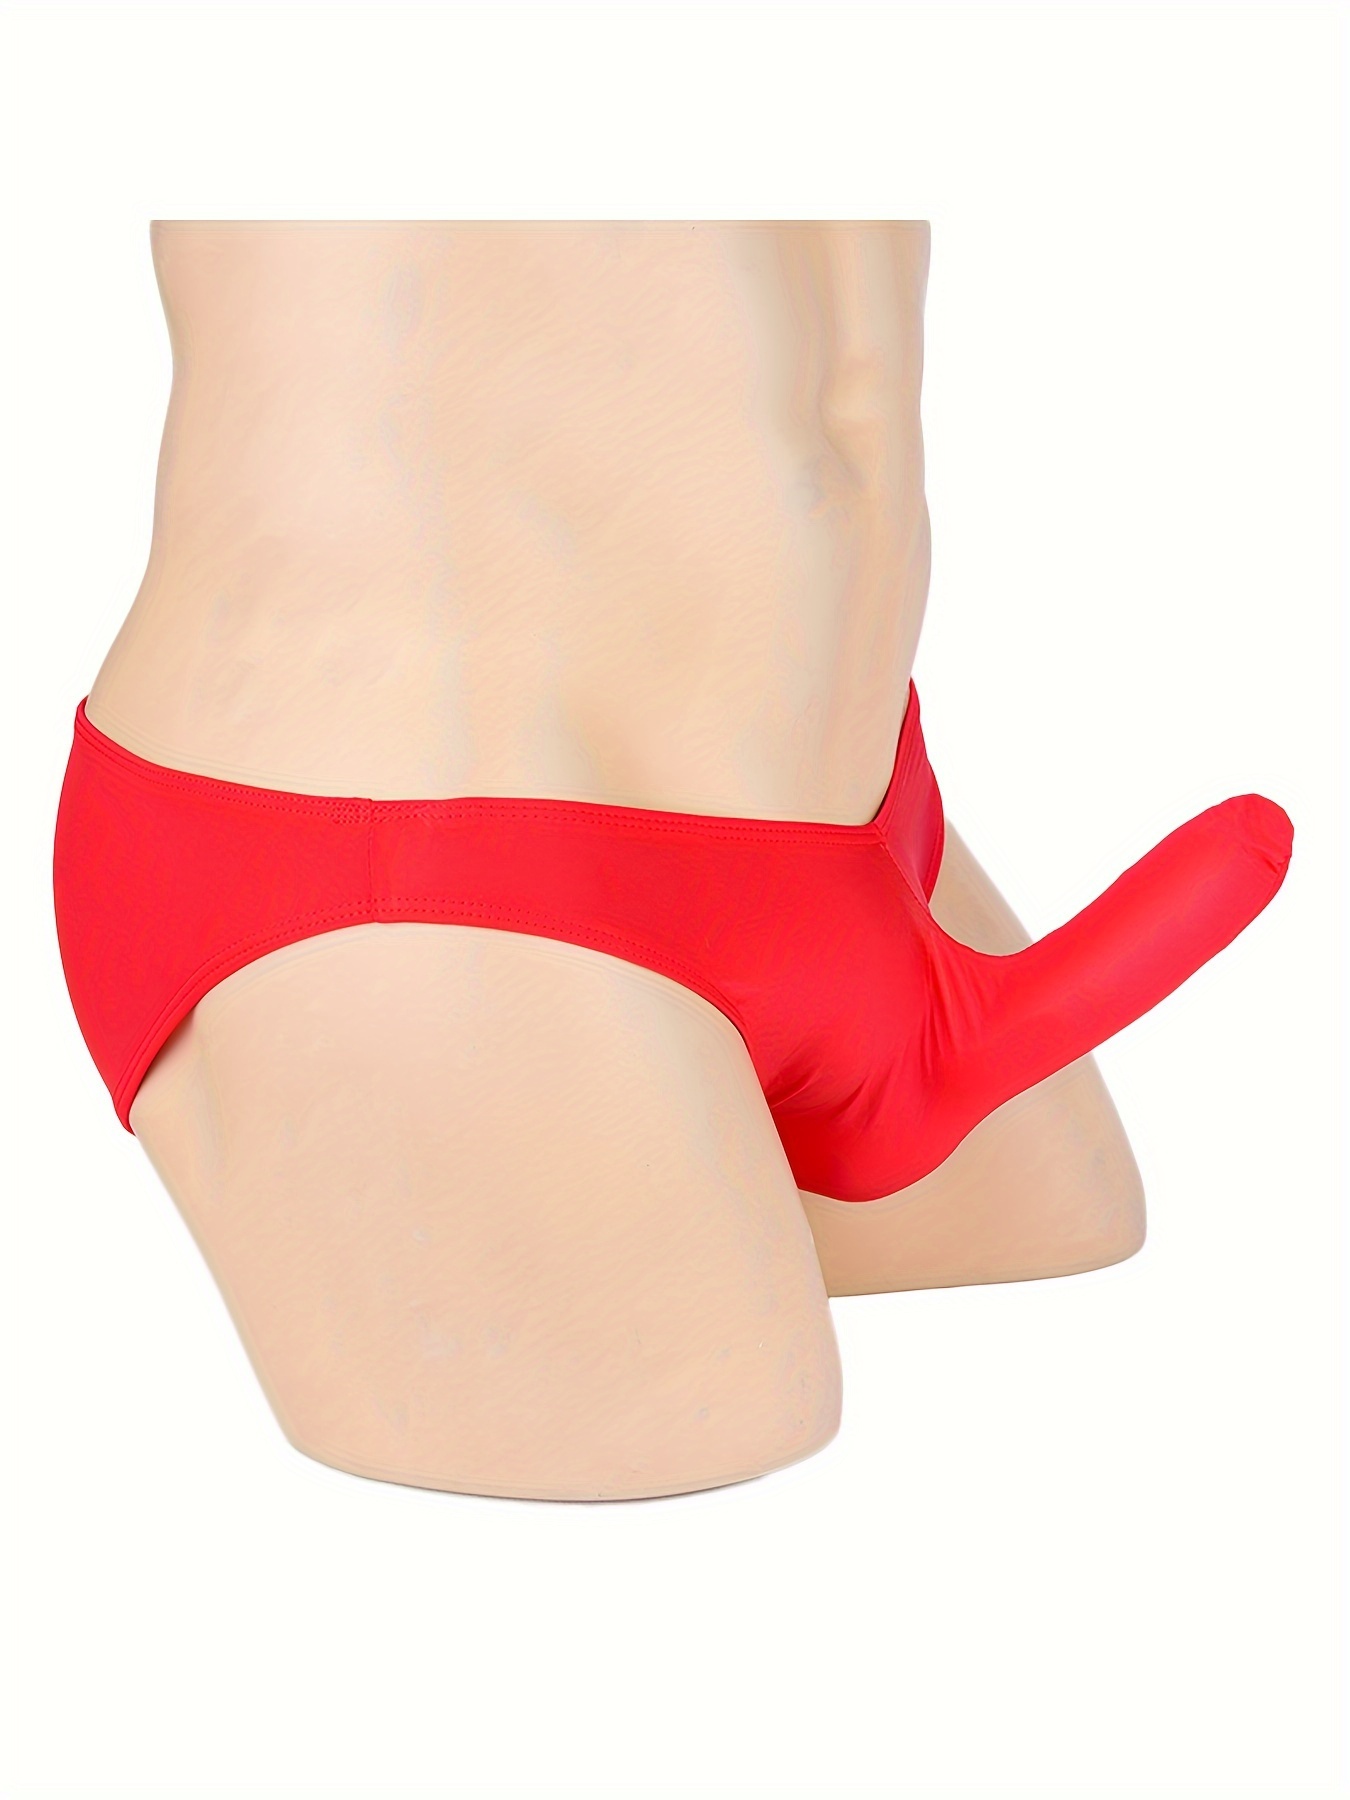 Men's Panties Sexy Nylon Soft Penis Pouch Briefs Cool Ice Silk Low